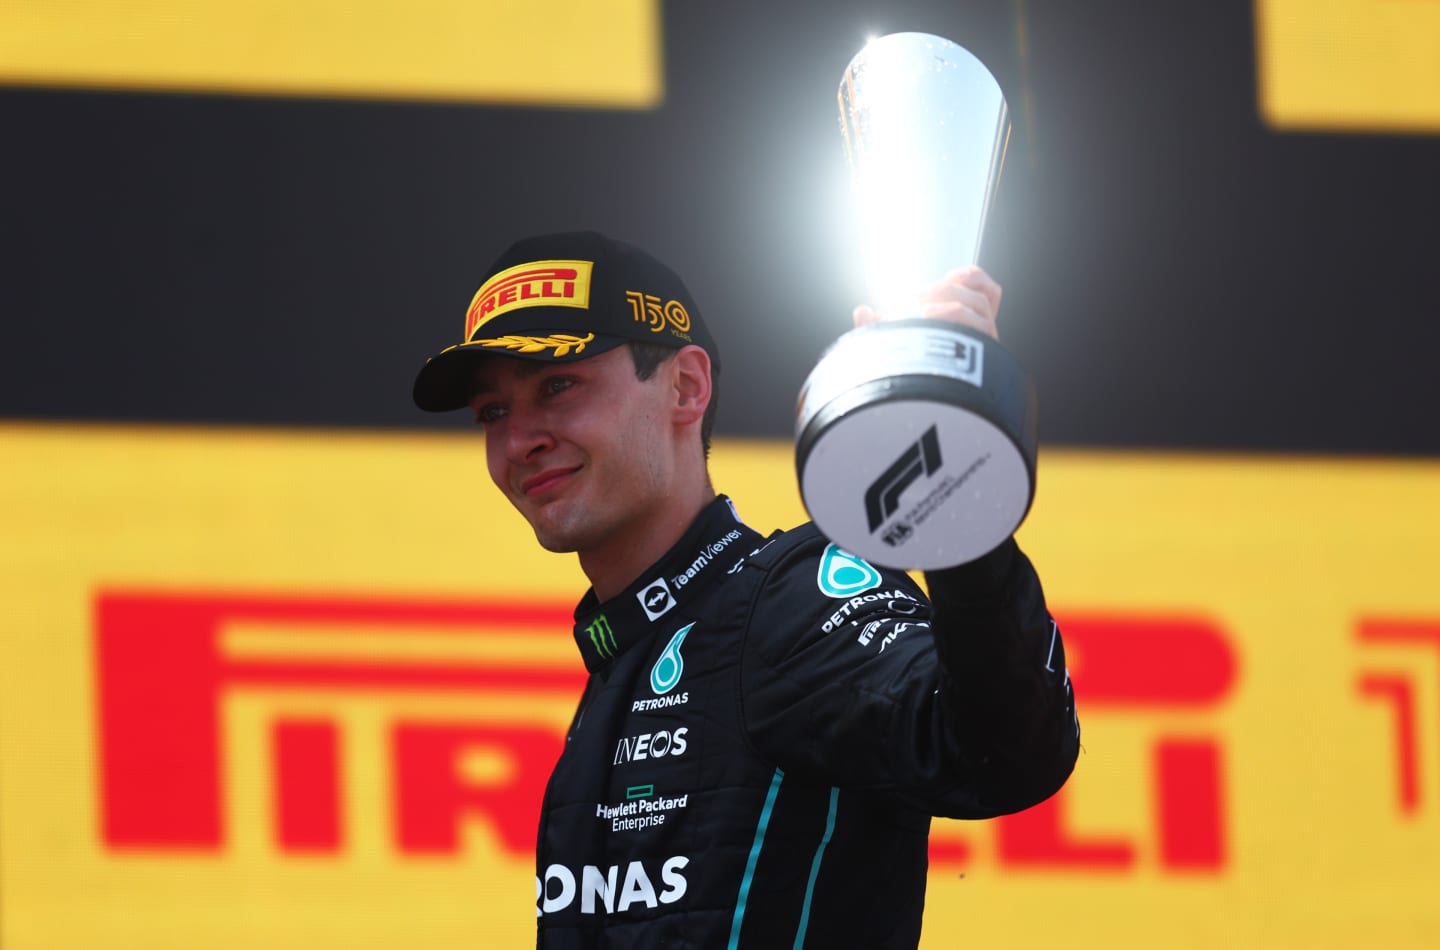 BARCELONA, SPAIN - MAY 22: Third placed George Russell of Great Britain and Mercedes celebrates on the podium during the F1 Grand Prix of Spain at Circuit de Barcelona-Catalunya on May 22, 2022 in Barcelona, Spain. (Photo by Alex Pantling - Formula 1/Formula 1 via Getty Images)